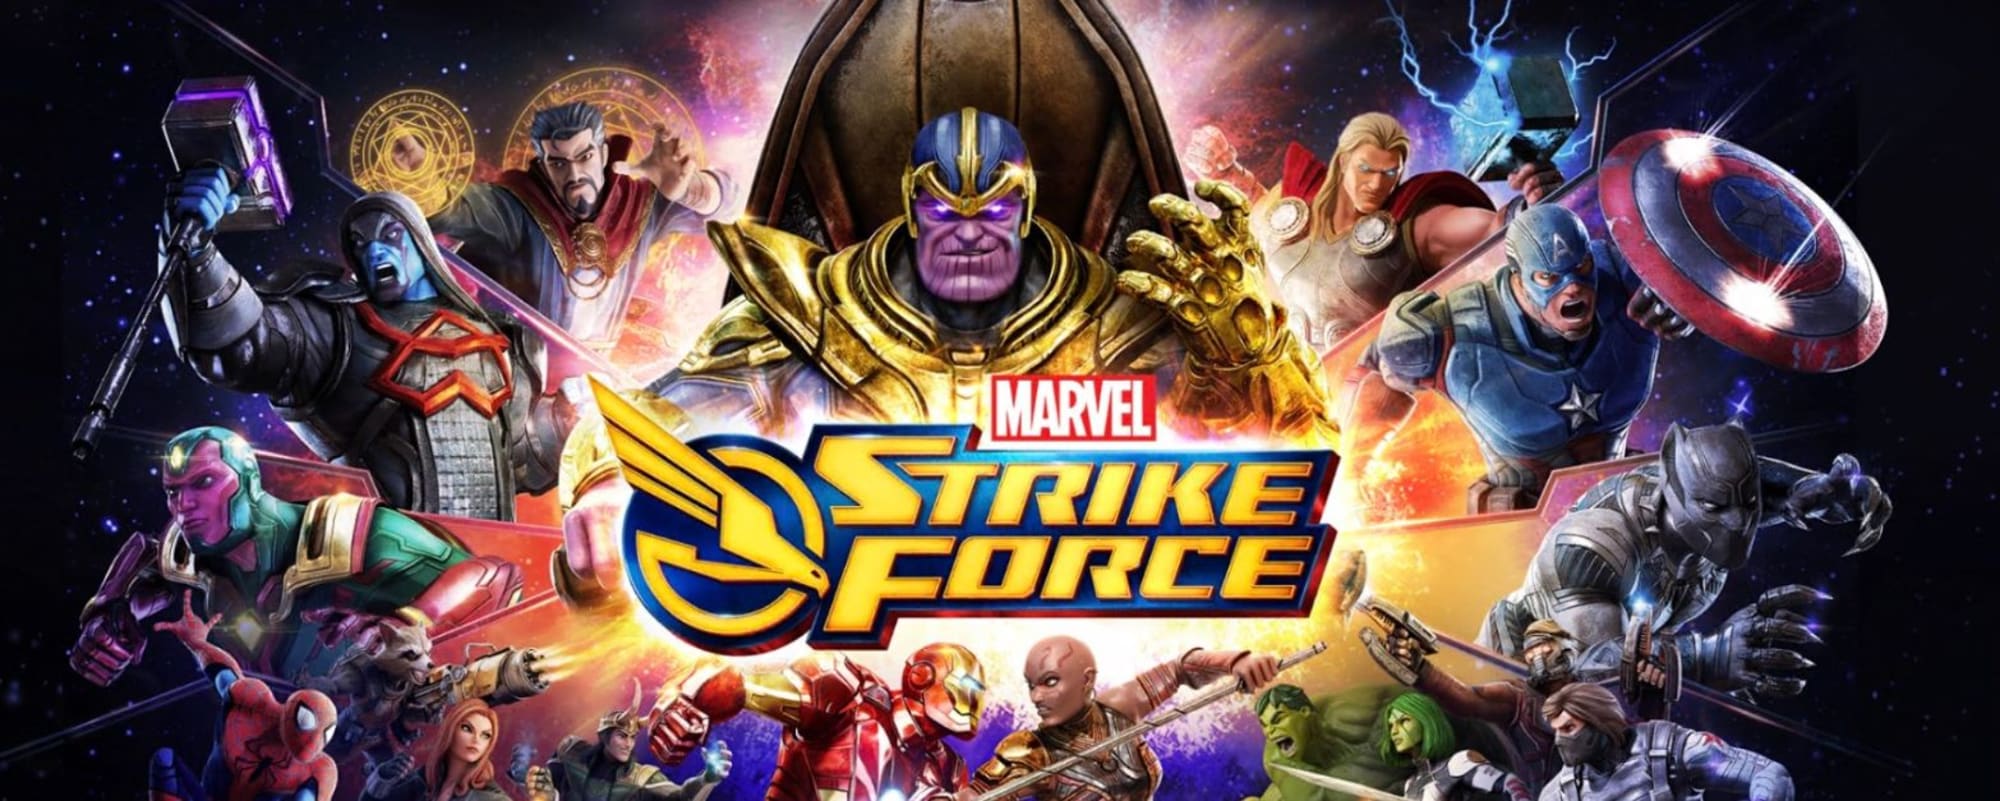 marvel strike force characters ranked 2021